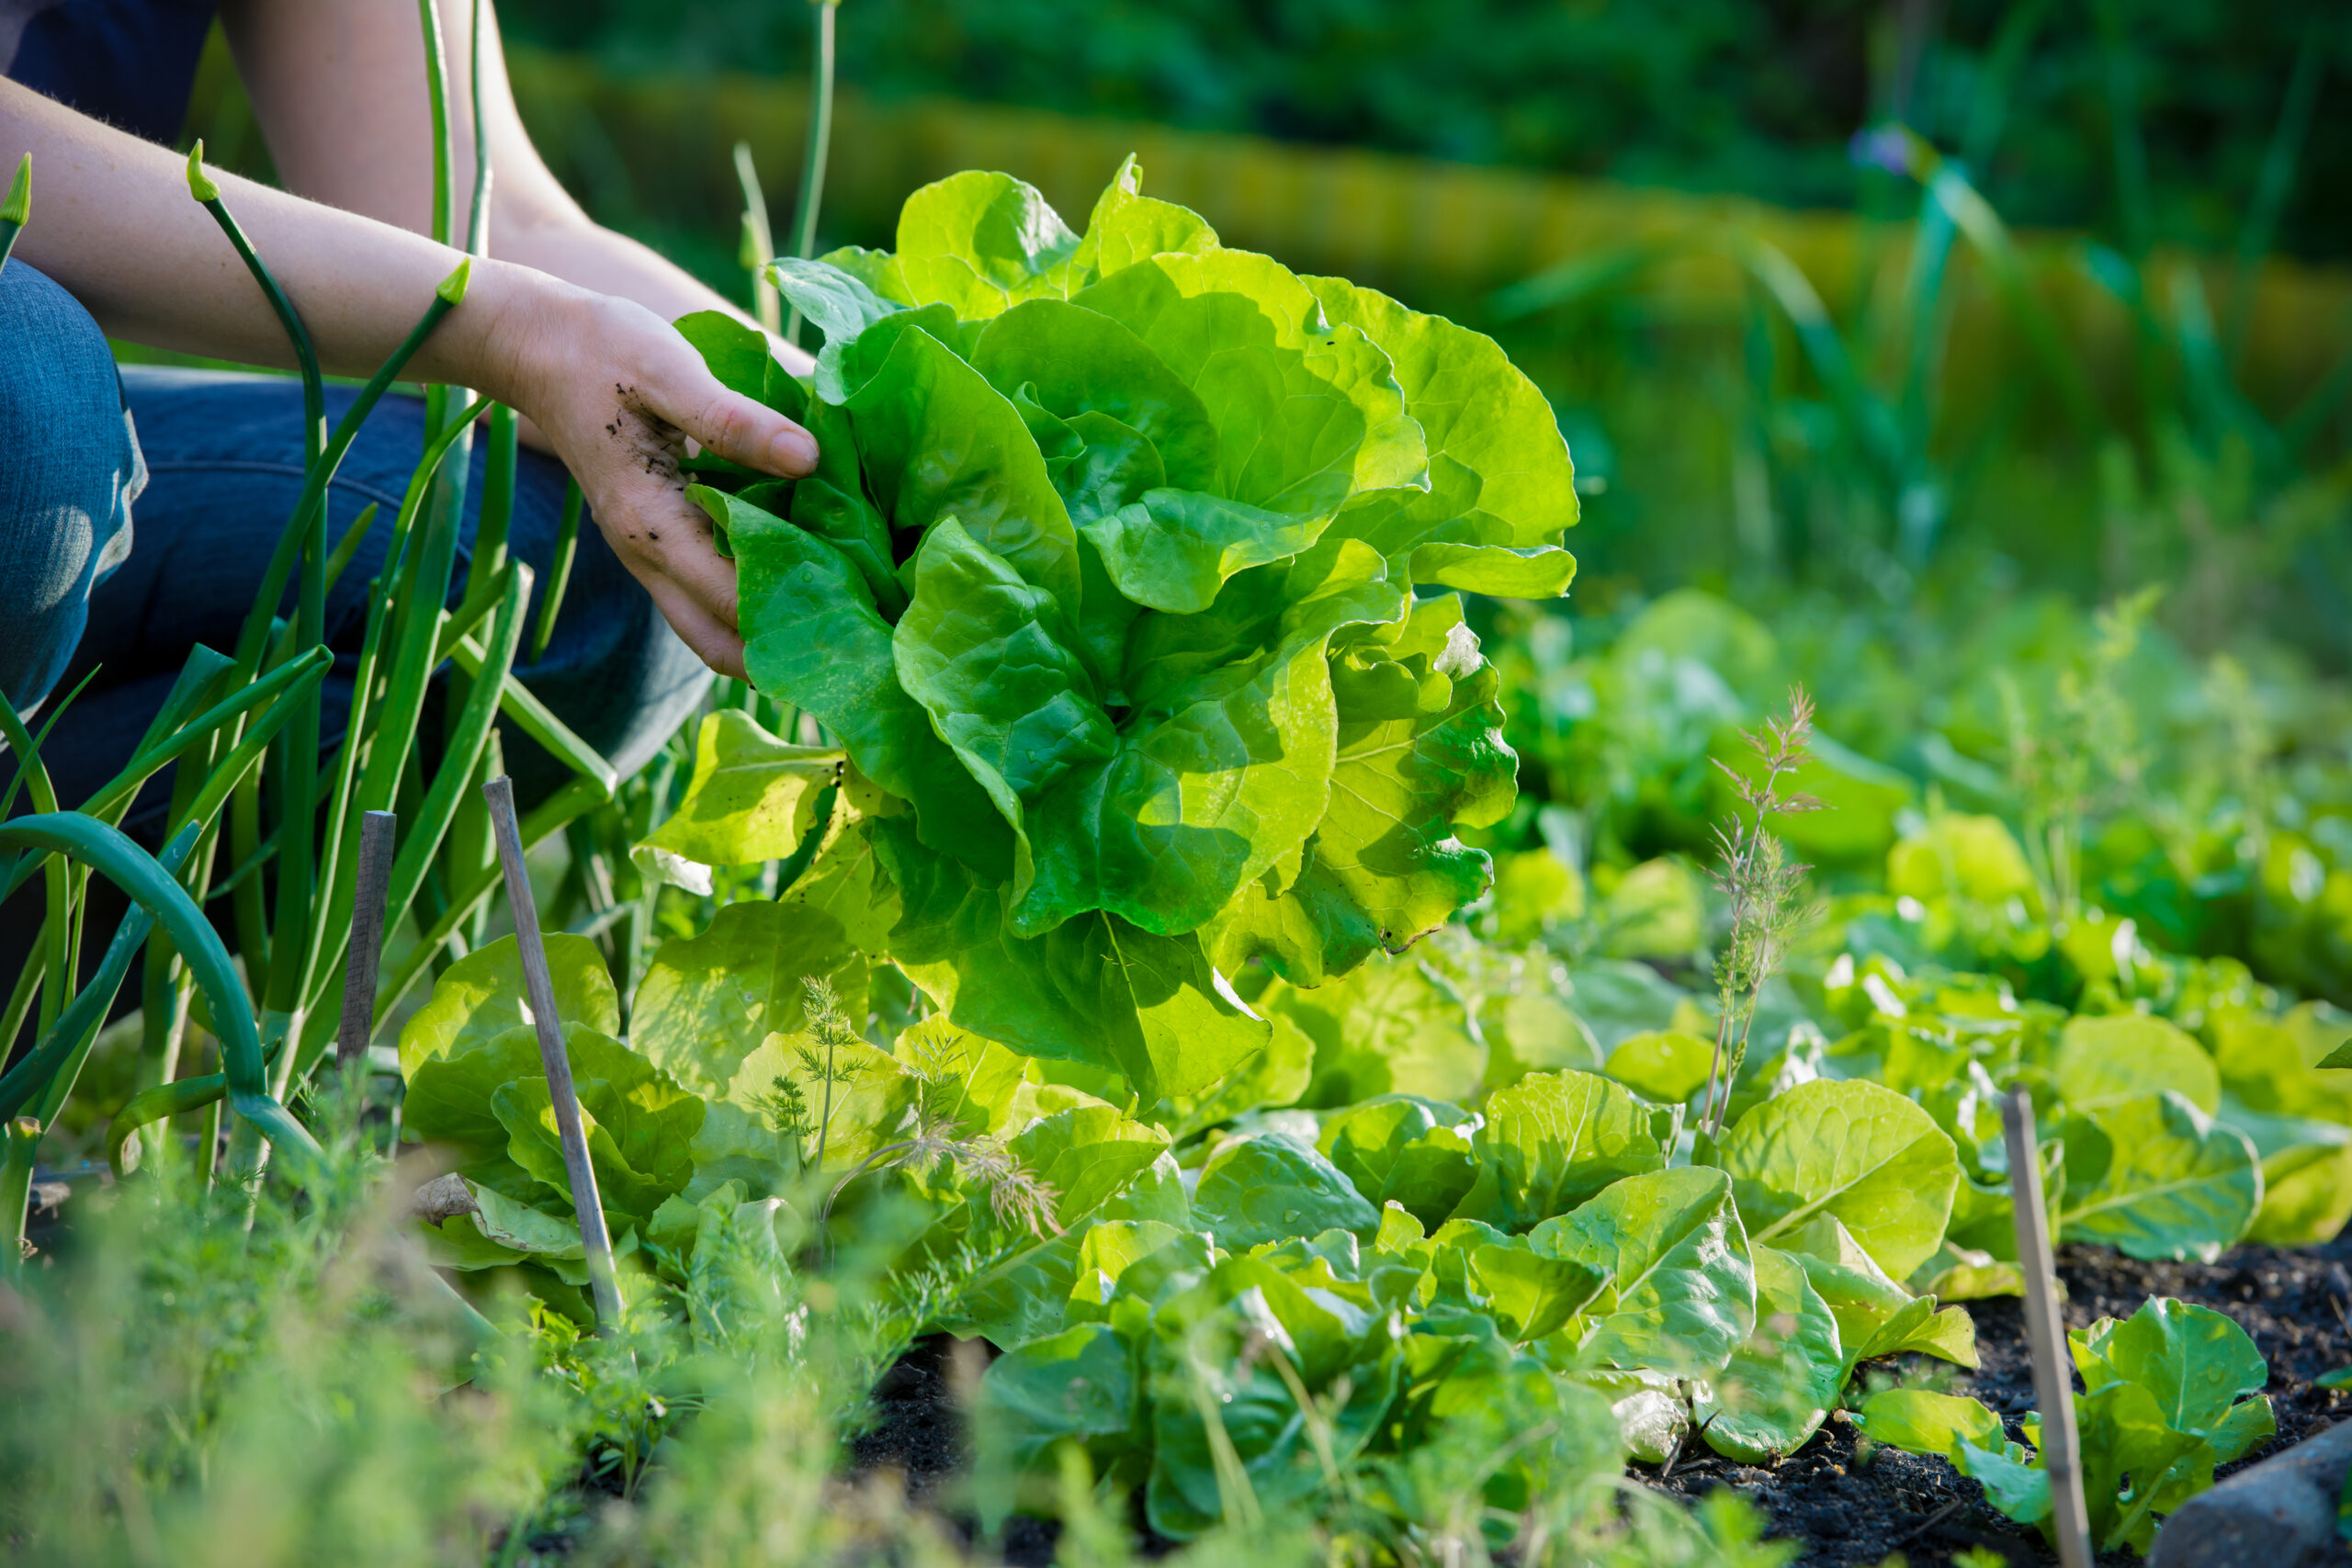 woman picking fresh lettuce from her garden - Want To Start Growing Your Own Food? The Best Plants To Start With